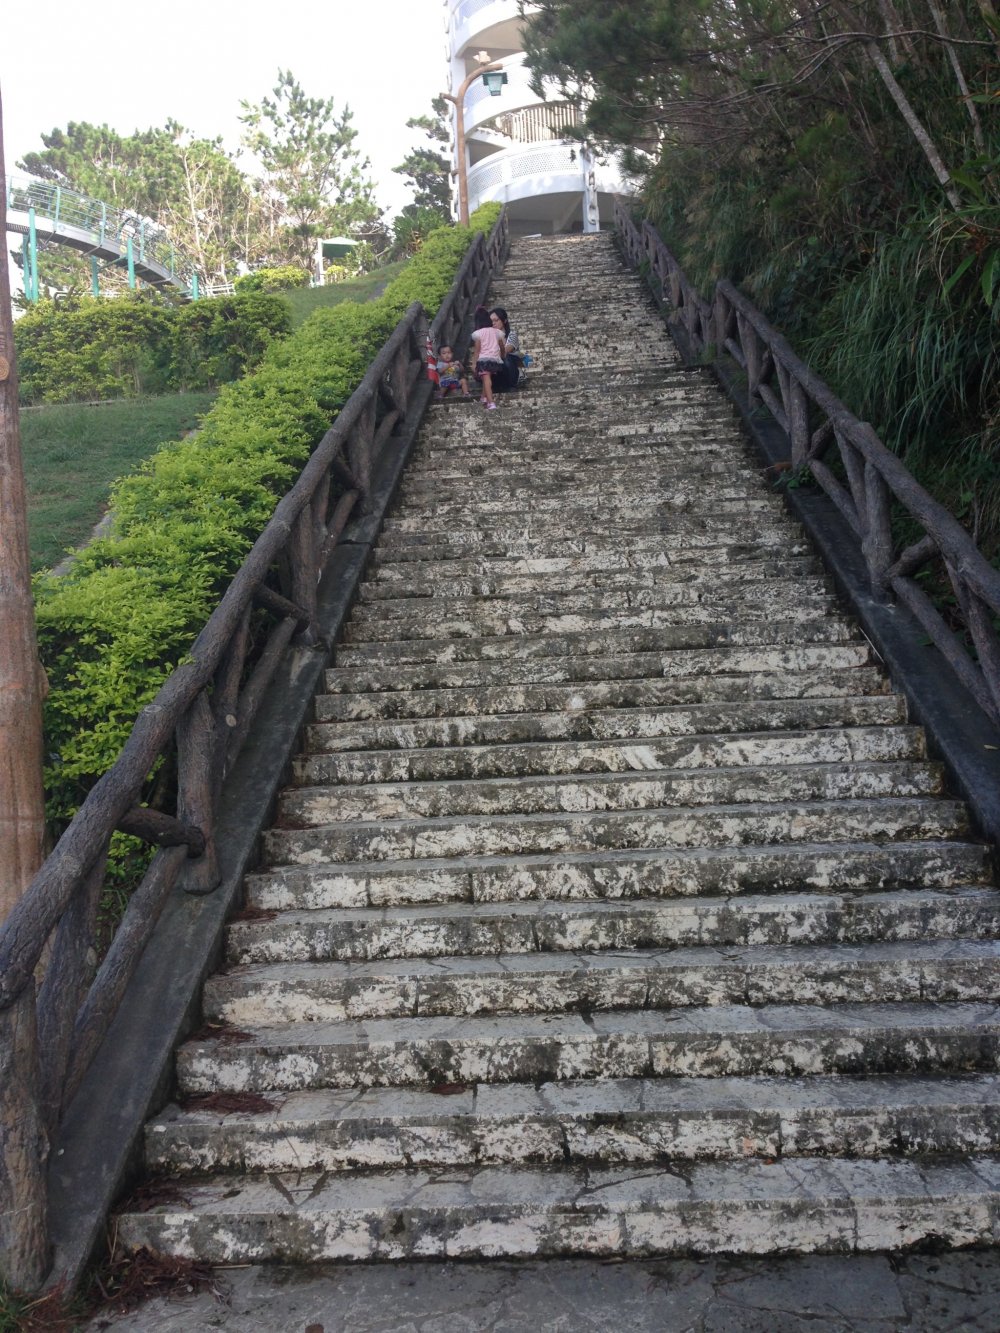 The steps leading to the top of the slide are steep and seemingly endless